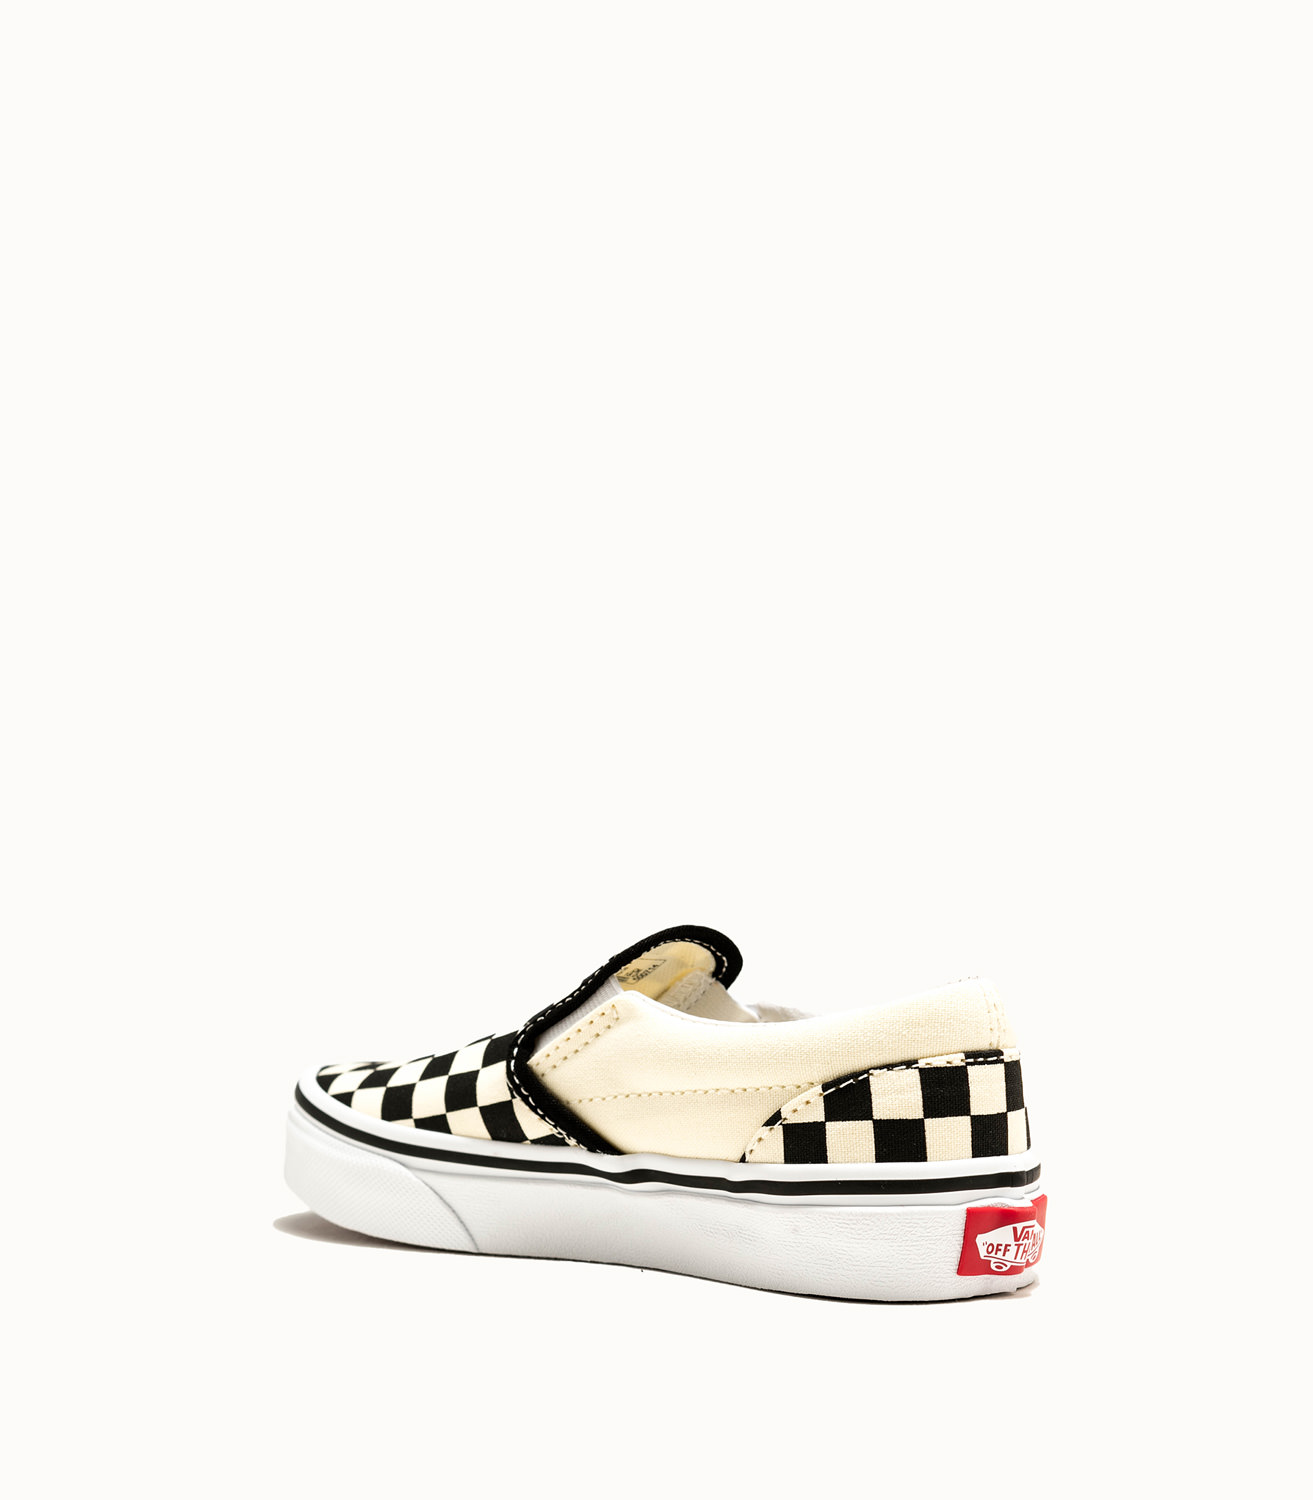 vans classic quito,New daily offers 